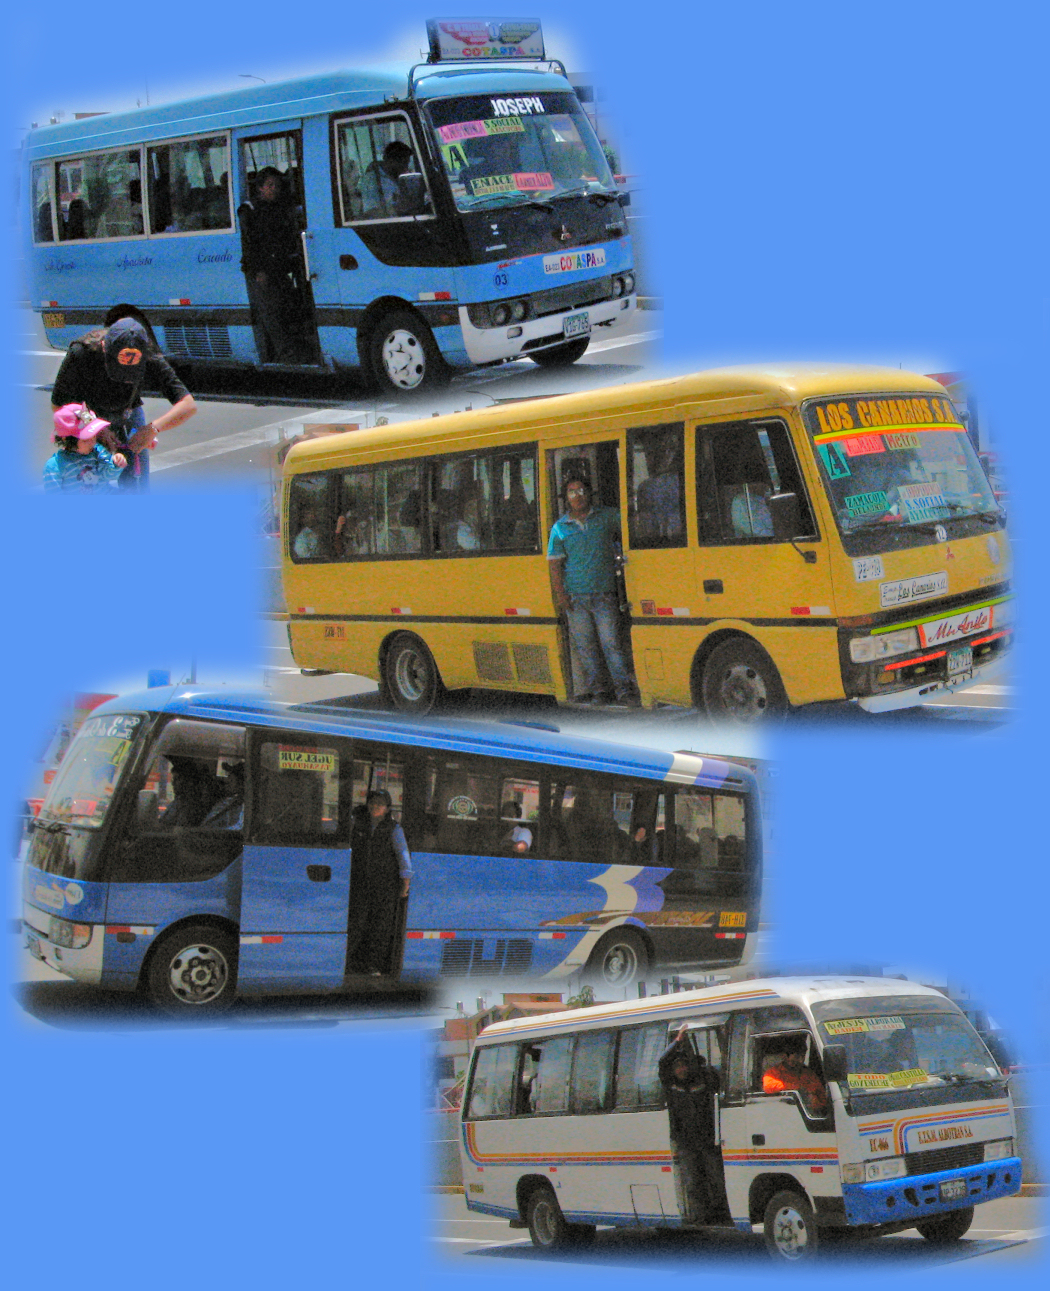 Busses in Arequipa